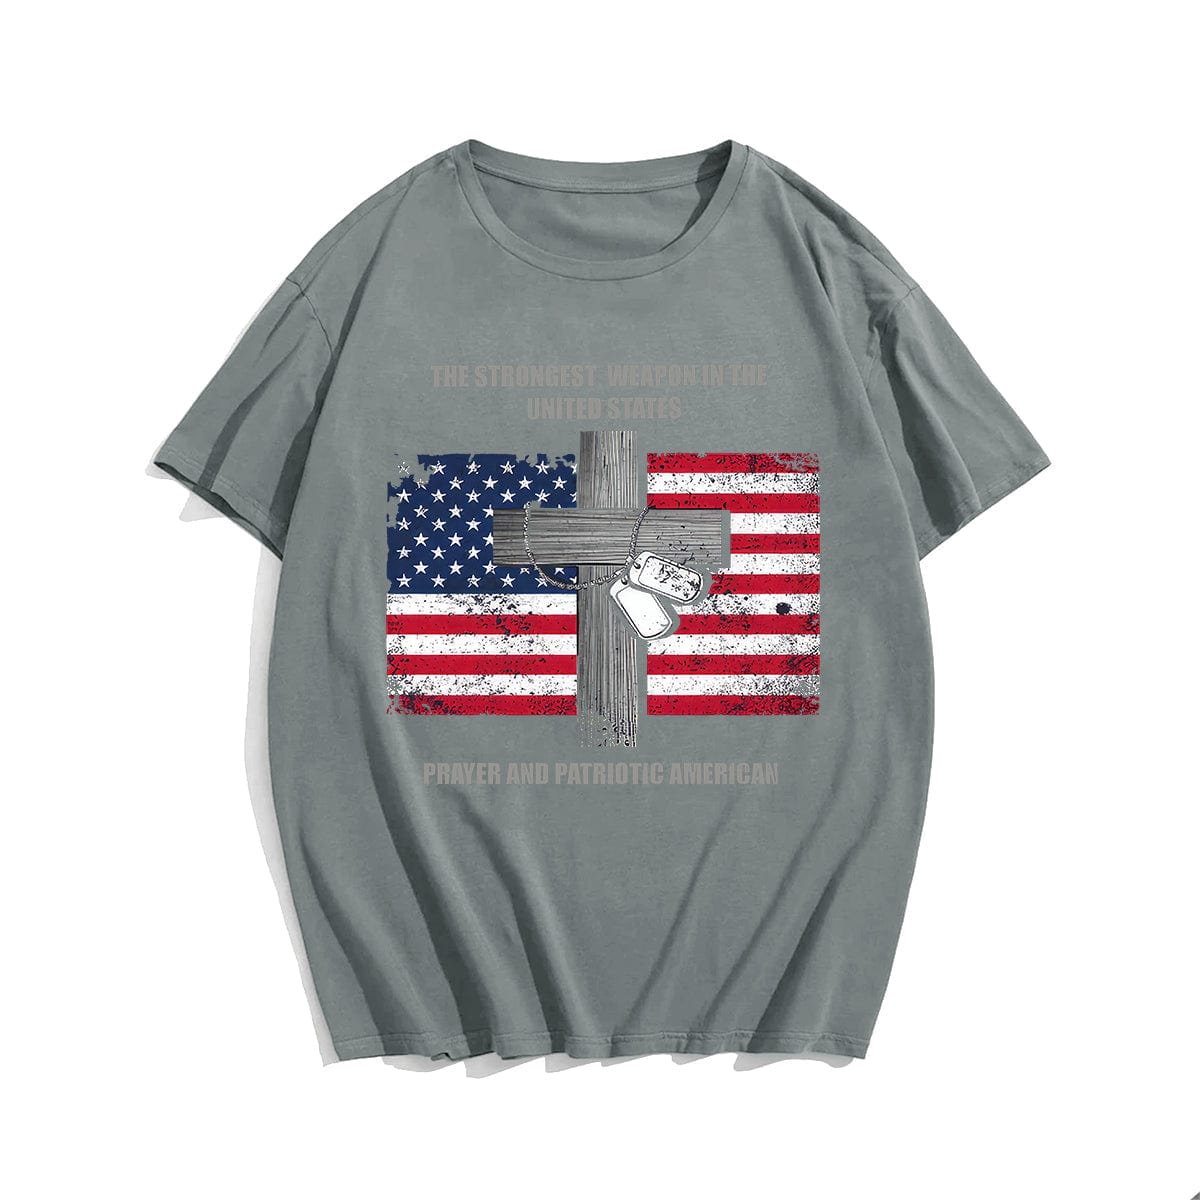 The Strongest Weapon In United States Prayer And American Patriotic Men's T-Shirts